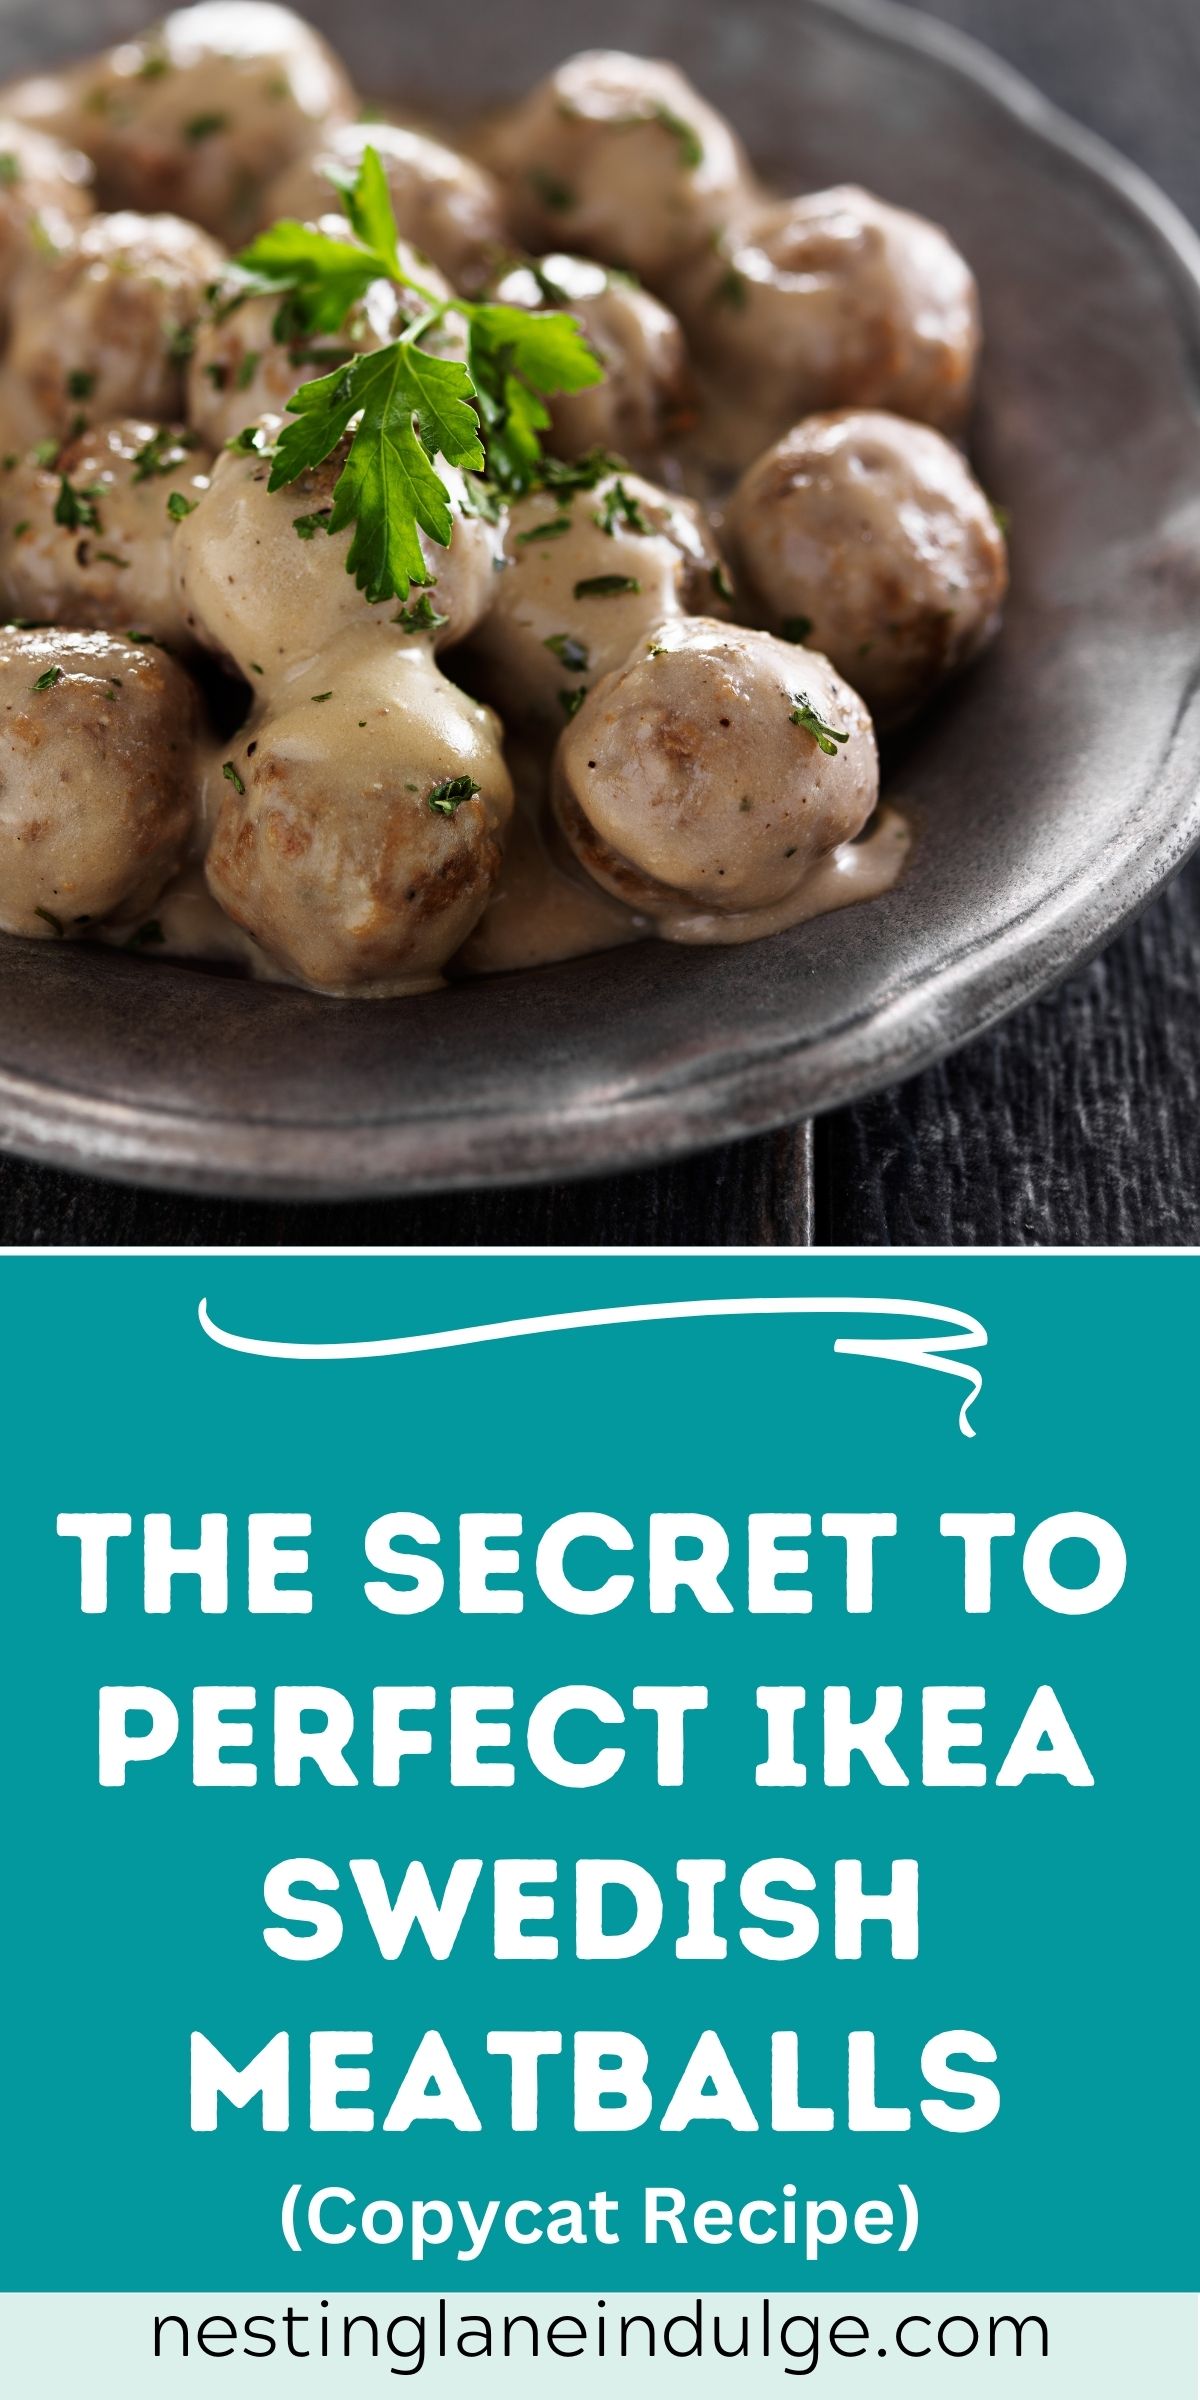 Graphic for Pinterest of The Secret to Perfect Ikea Swedish Meatballs (Revealed) - Copycat Recipe.